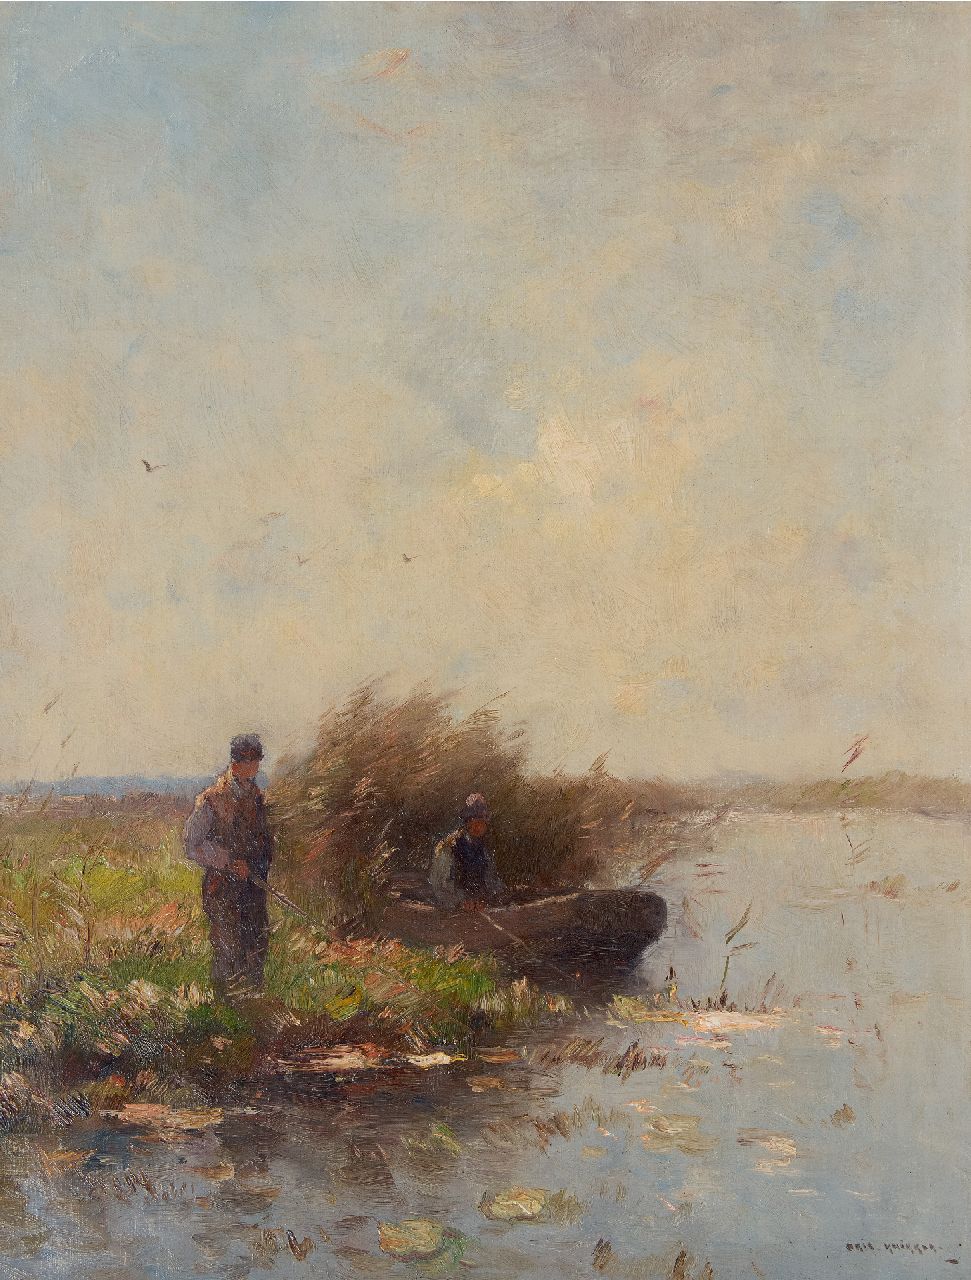 Knikker A.  | Aris Knikker | Paintings offered for sale | Fishing in the reeds, oil on canvas 65.2 x 49.5 cm, signed l.r.